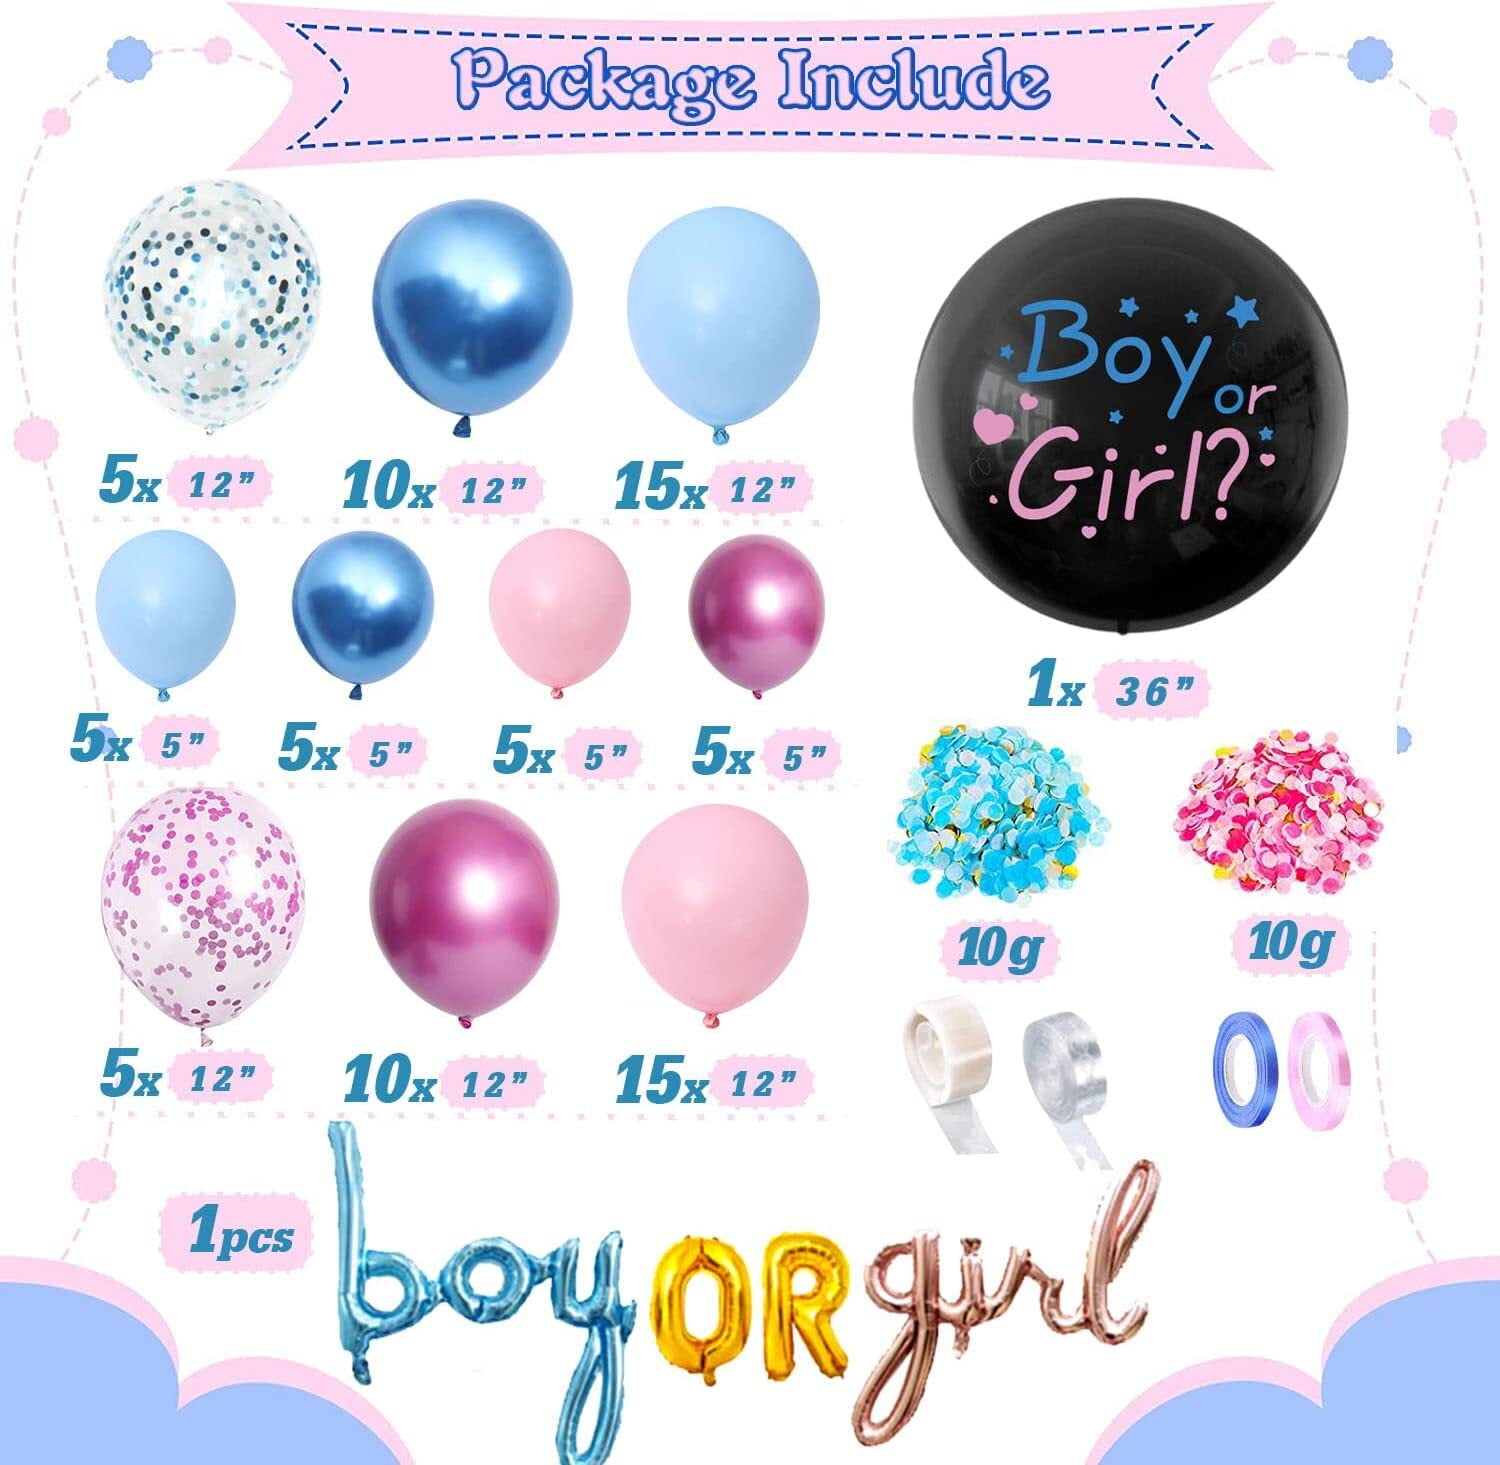 YANSION Gender Reveal Party Supplies Baby Gender Reveal Decorations Kit  with 36'' Gender Reveal Balloon, Pink and Blue Balloons, Boy or Girl Gender  Reveal Baby Shower Party 